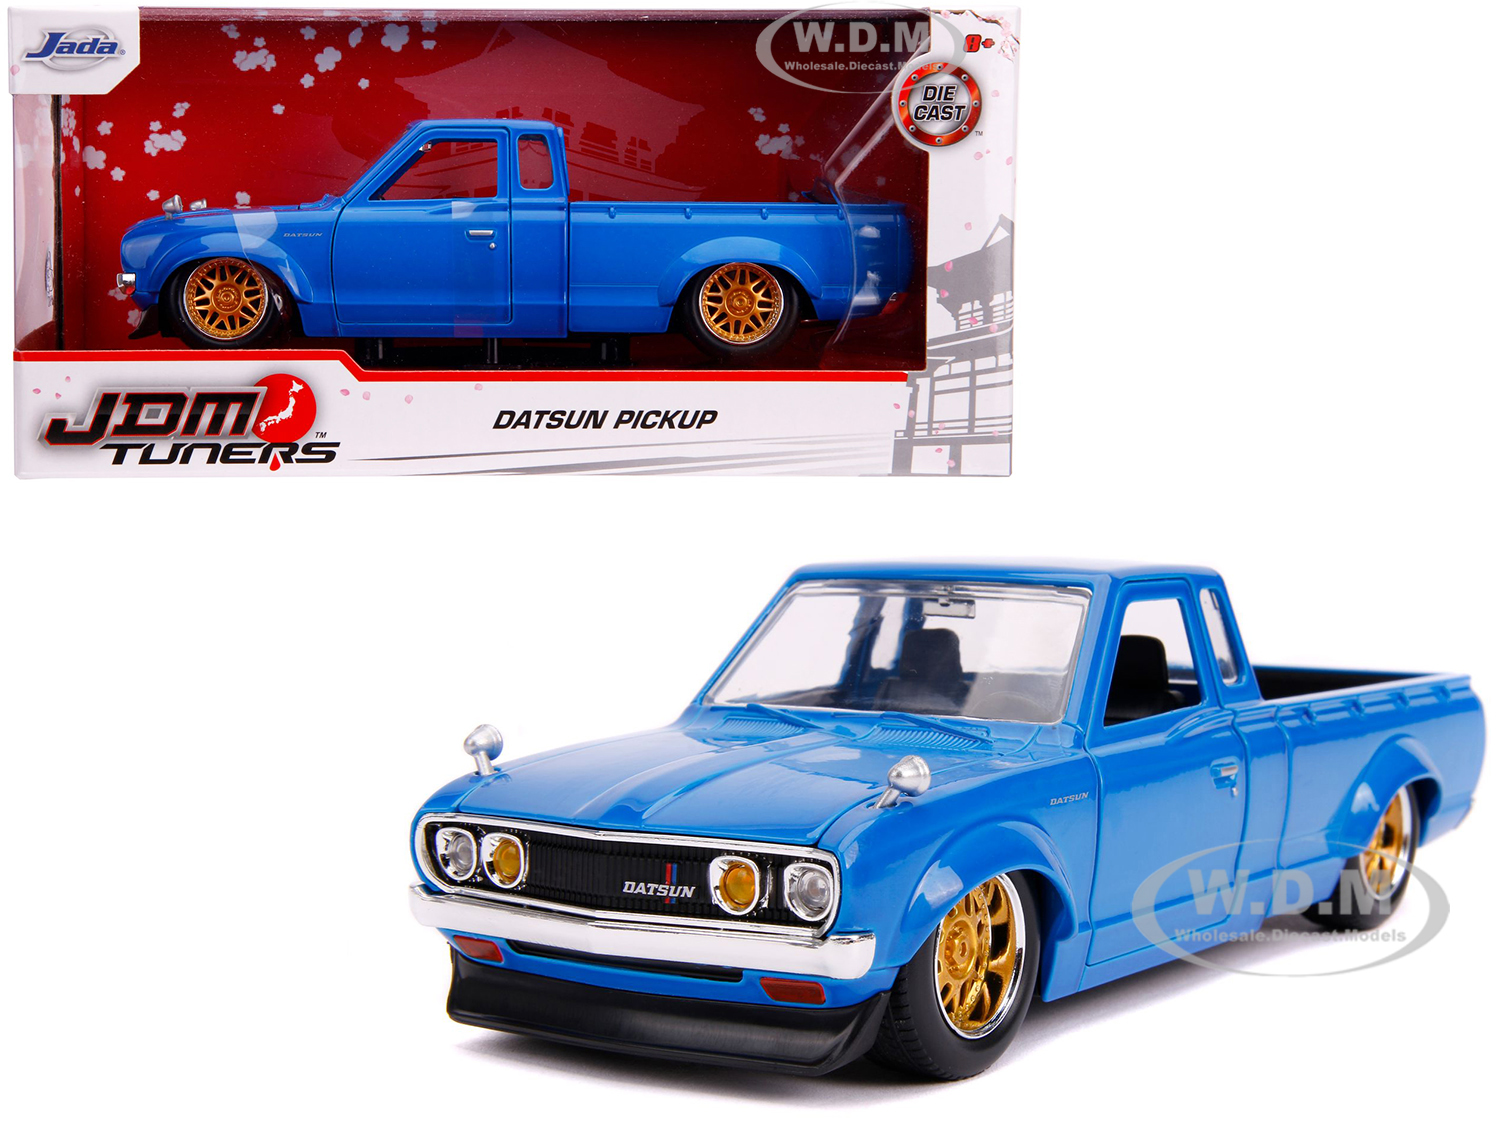 Datsun Pickup Truck Bright Blue With Gold Wheels "jdm Tuners" 1/24 Diecast Model Car By Jada